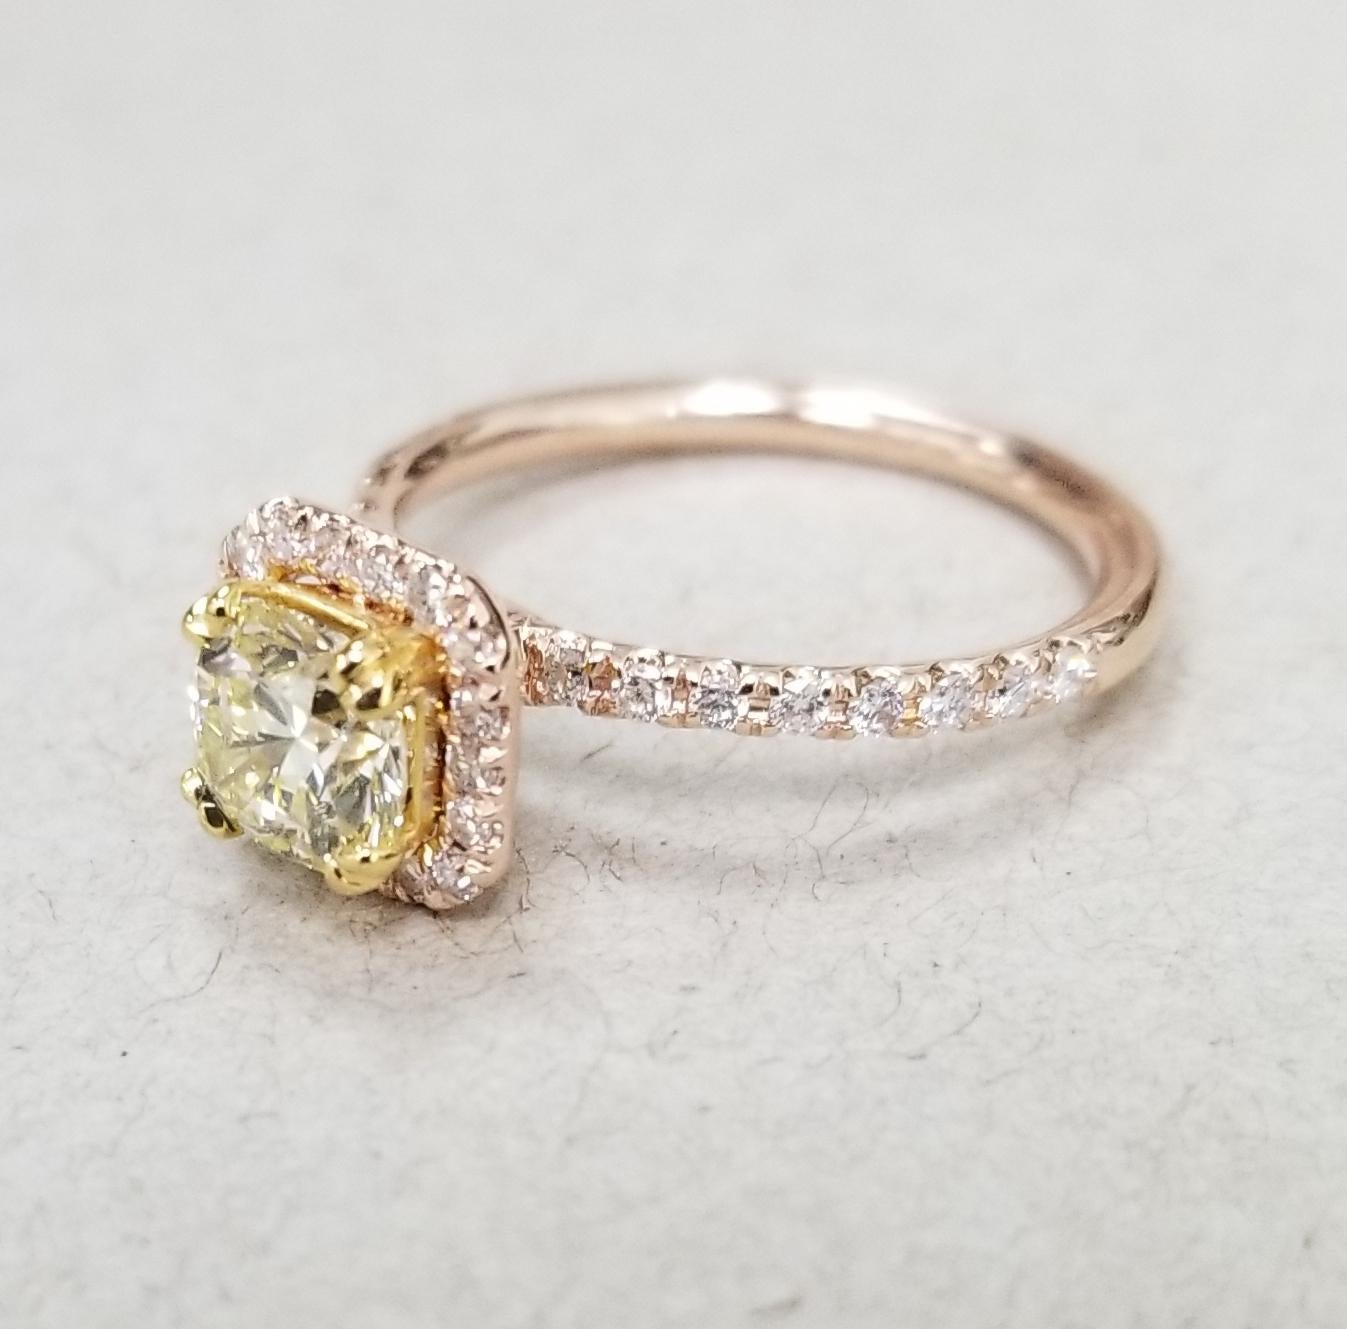 14k rose gold EGL .93pts. natural light yellow and VS1 clarity surrounded by 36 round full cut diamond of nice quality weighing .35pts. set in a halo ring.